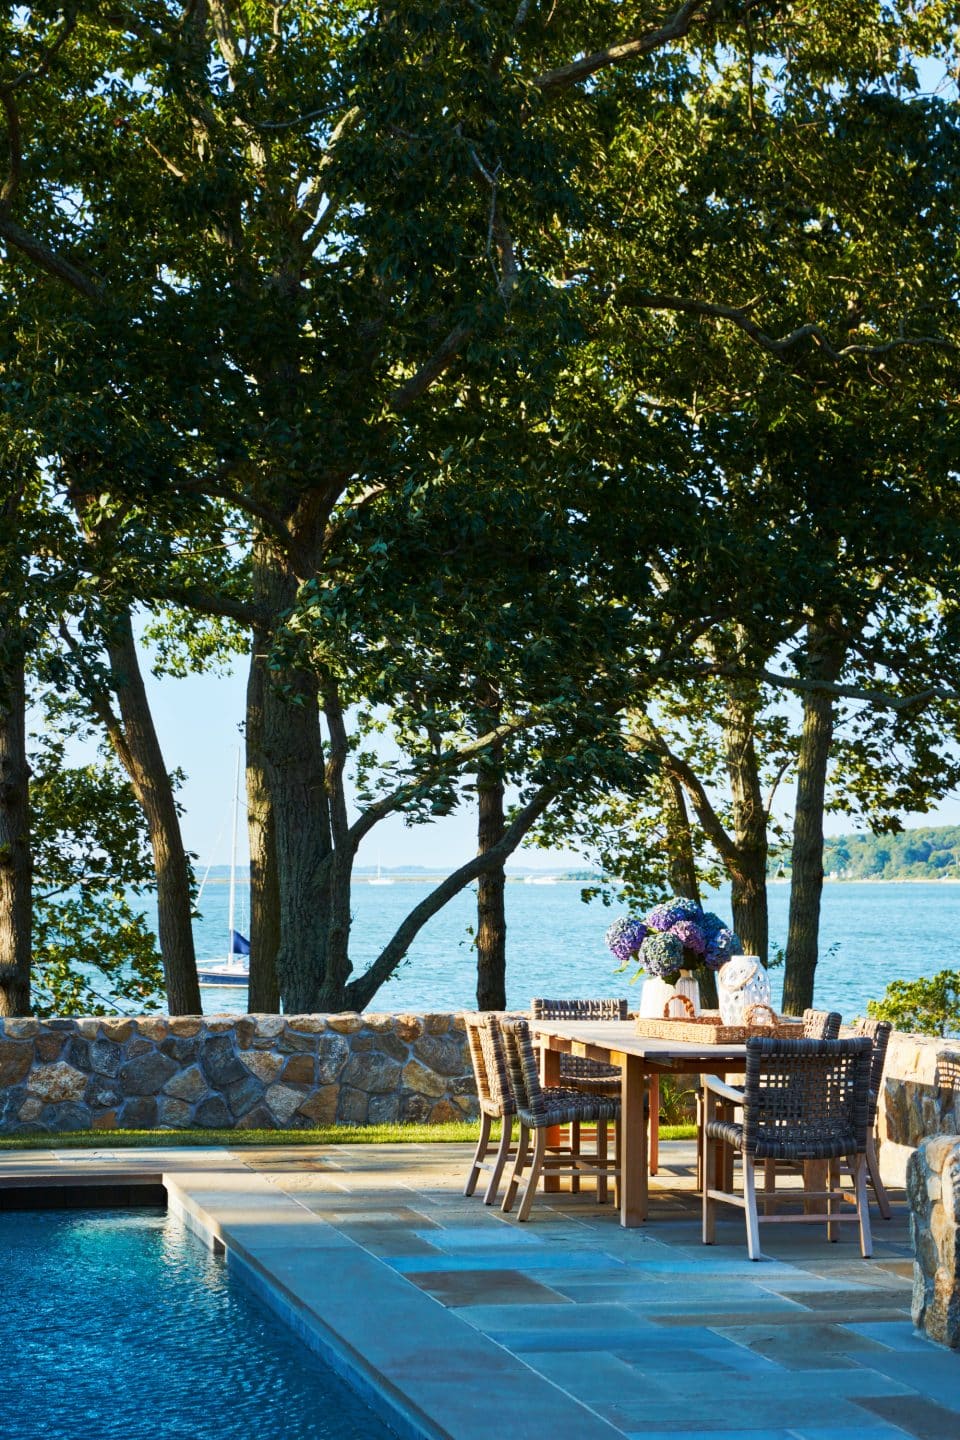 Carrier and Company Crafted a Sunny, Airy Escape on Shelter Island